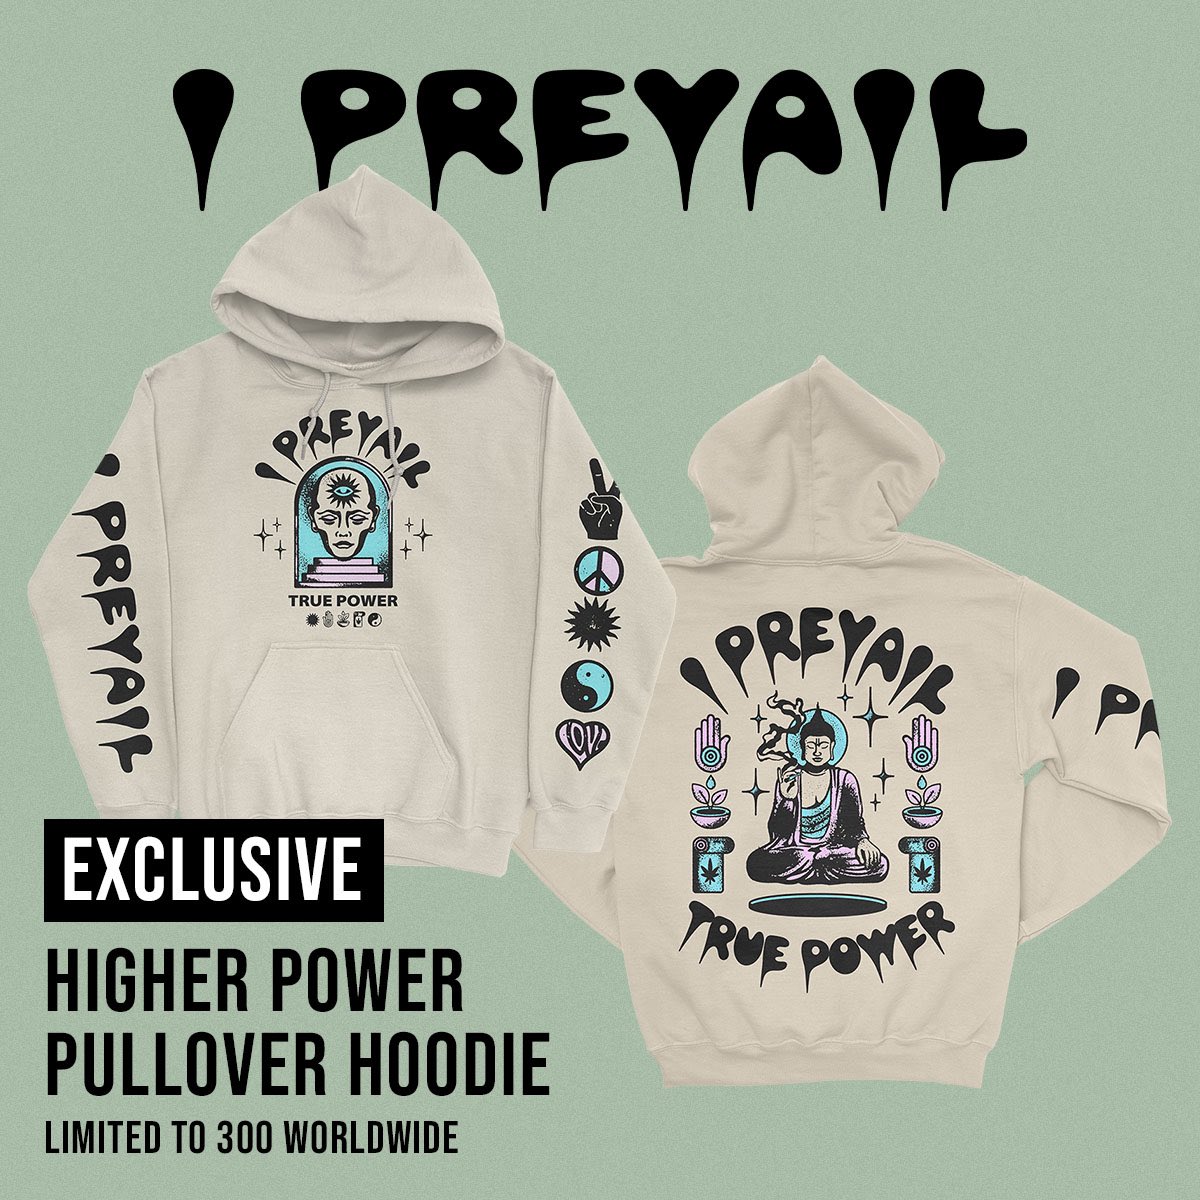 NEW MERCH Our exclusive Higher Power Pullover Hoodie is available for pre-order at iprevailmerch.com. Only 300 will be made so get yours before it’s gone.